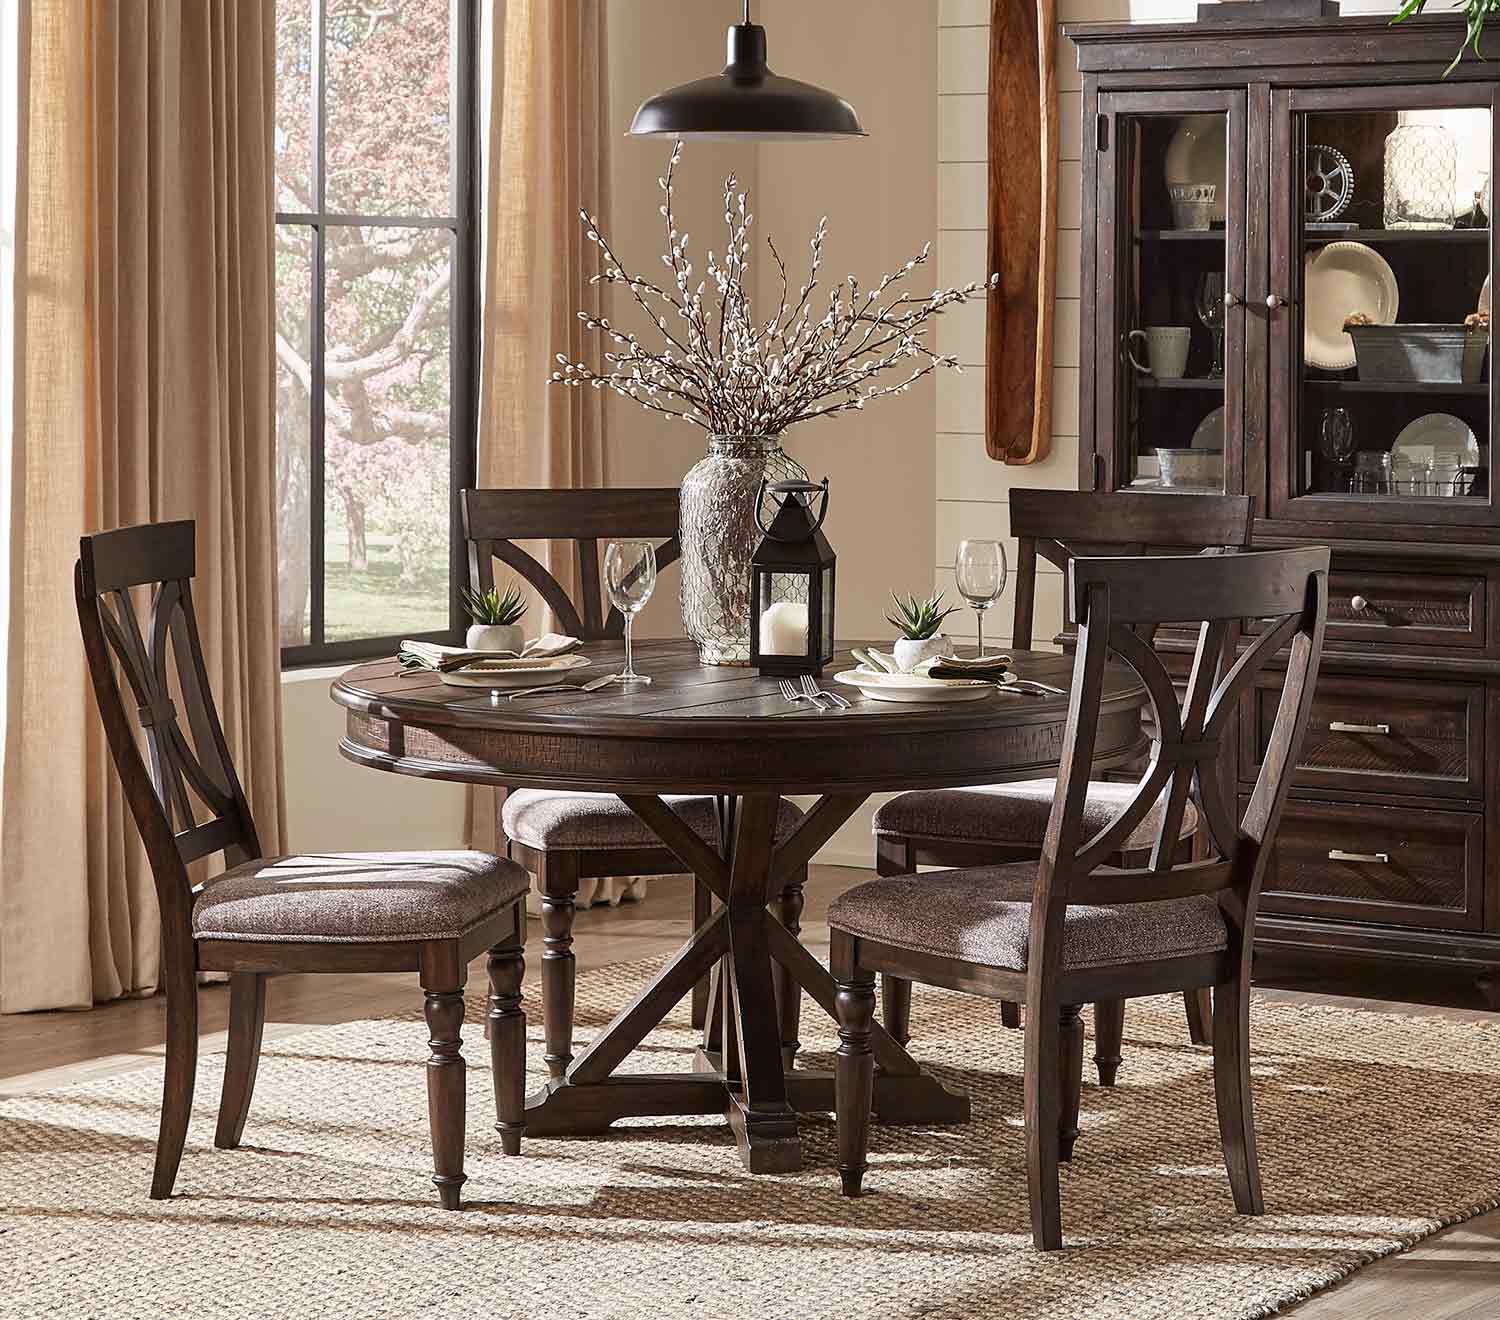 Homelegance Cardano Round Dining Set - Driftwood Charcoal